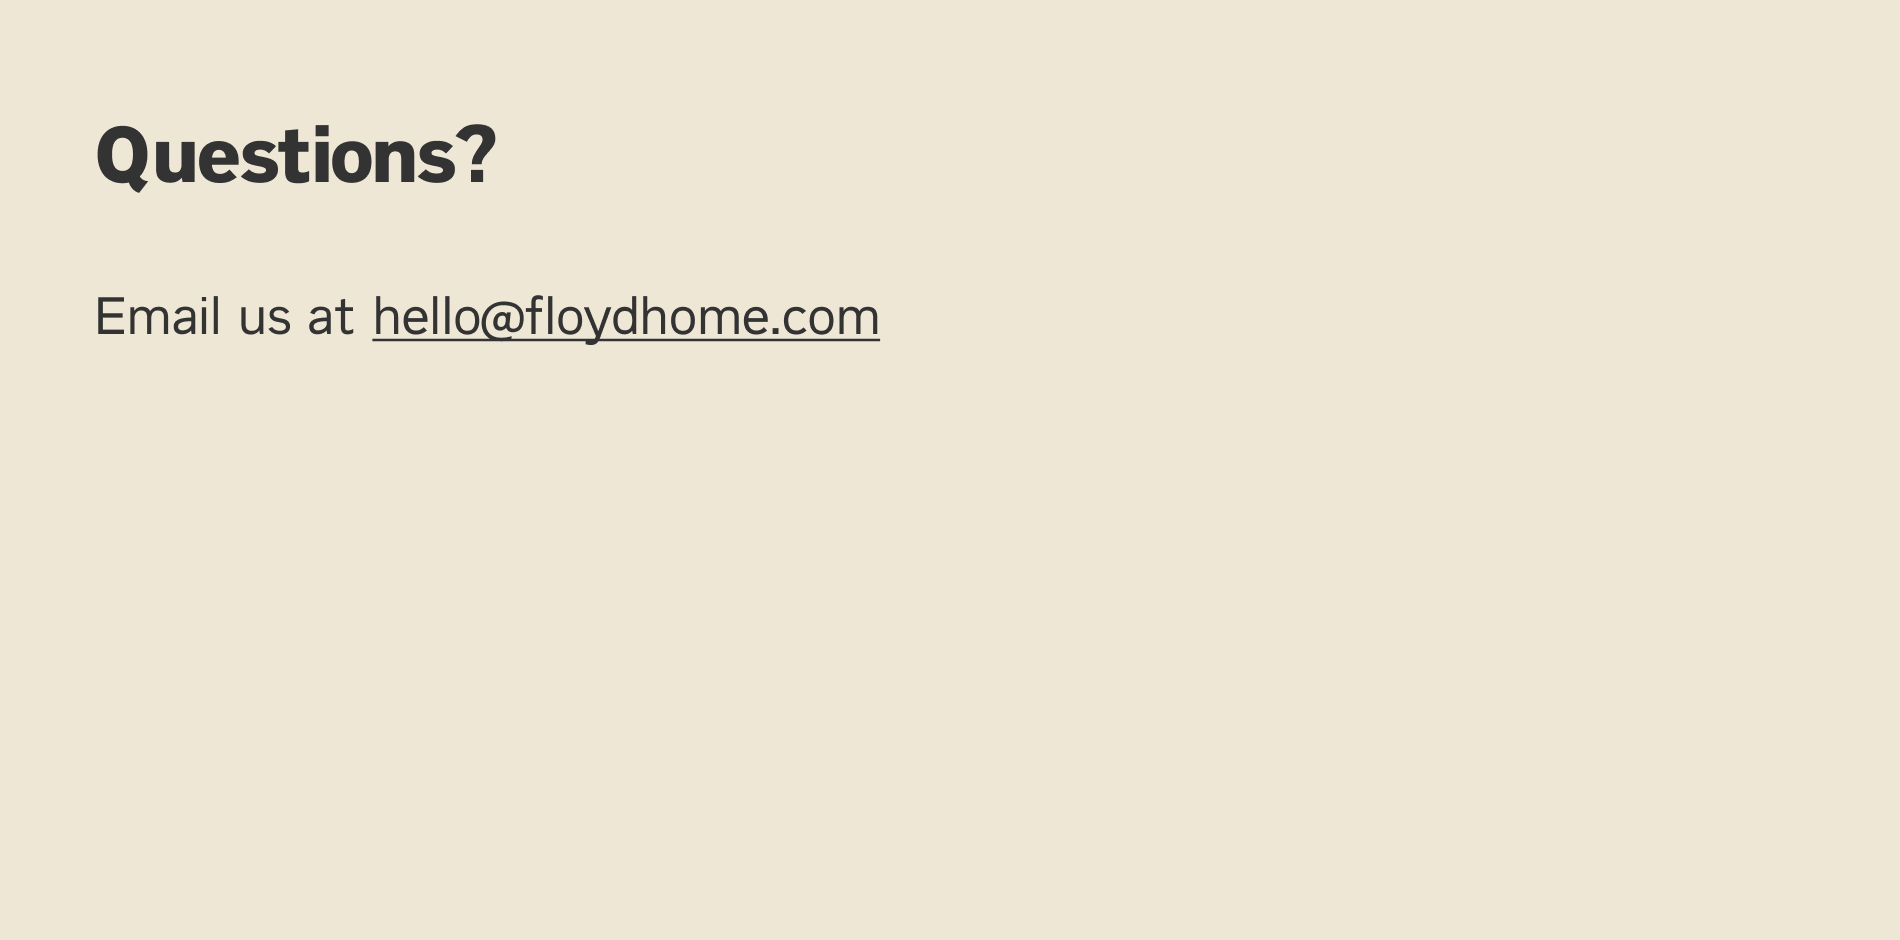 Questions? Email us at hello@floydhome.com